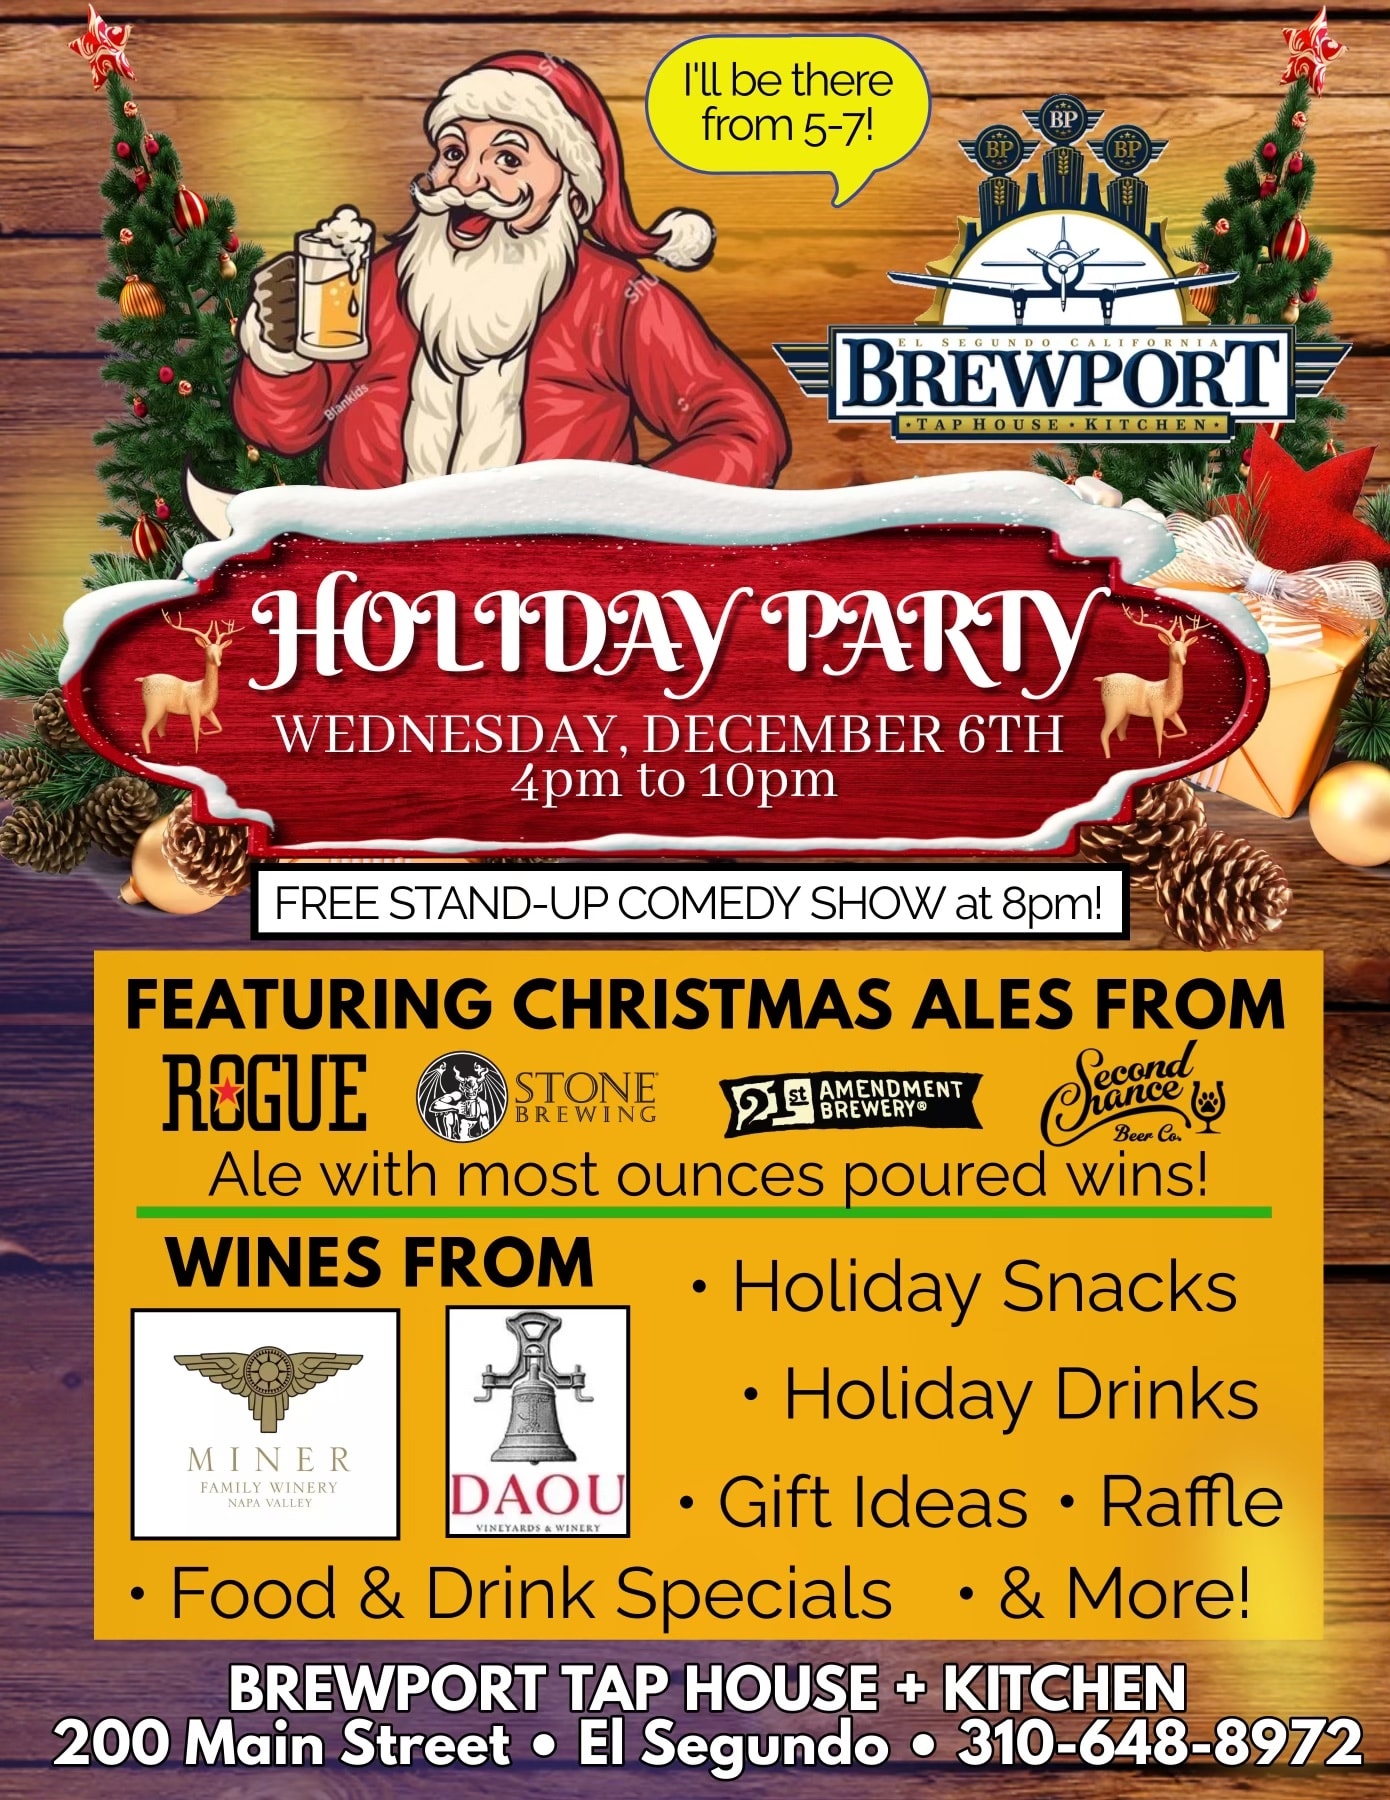 Happy Holidays from Brewport Taphouse